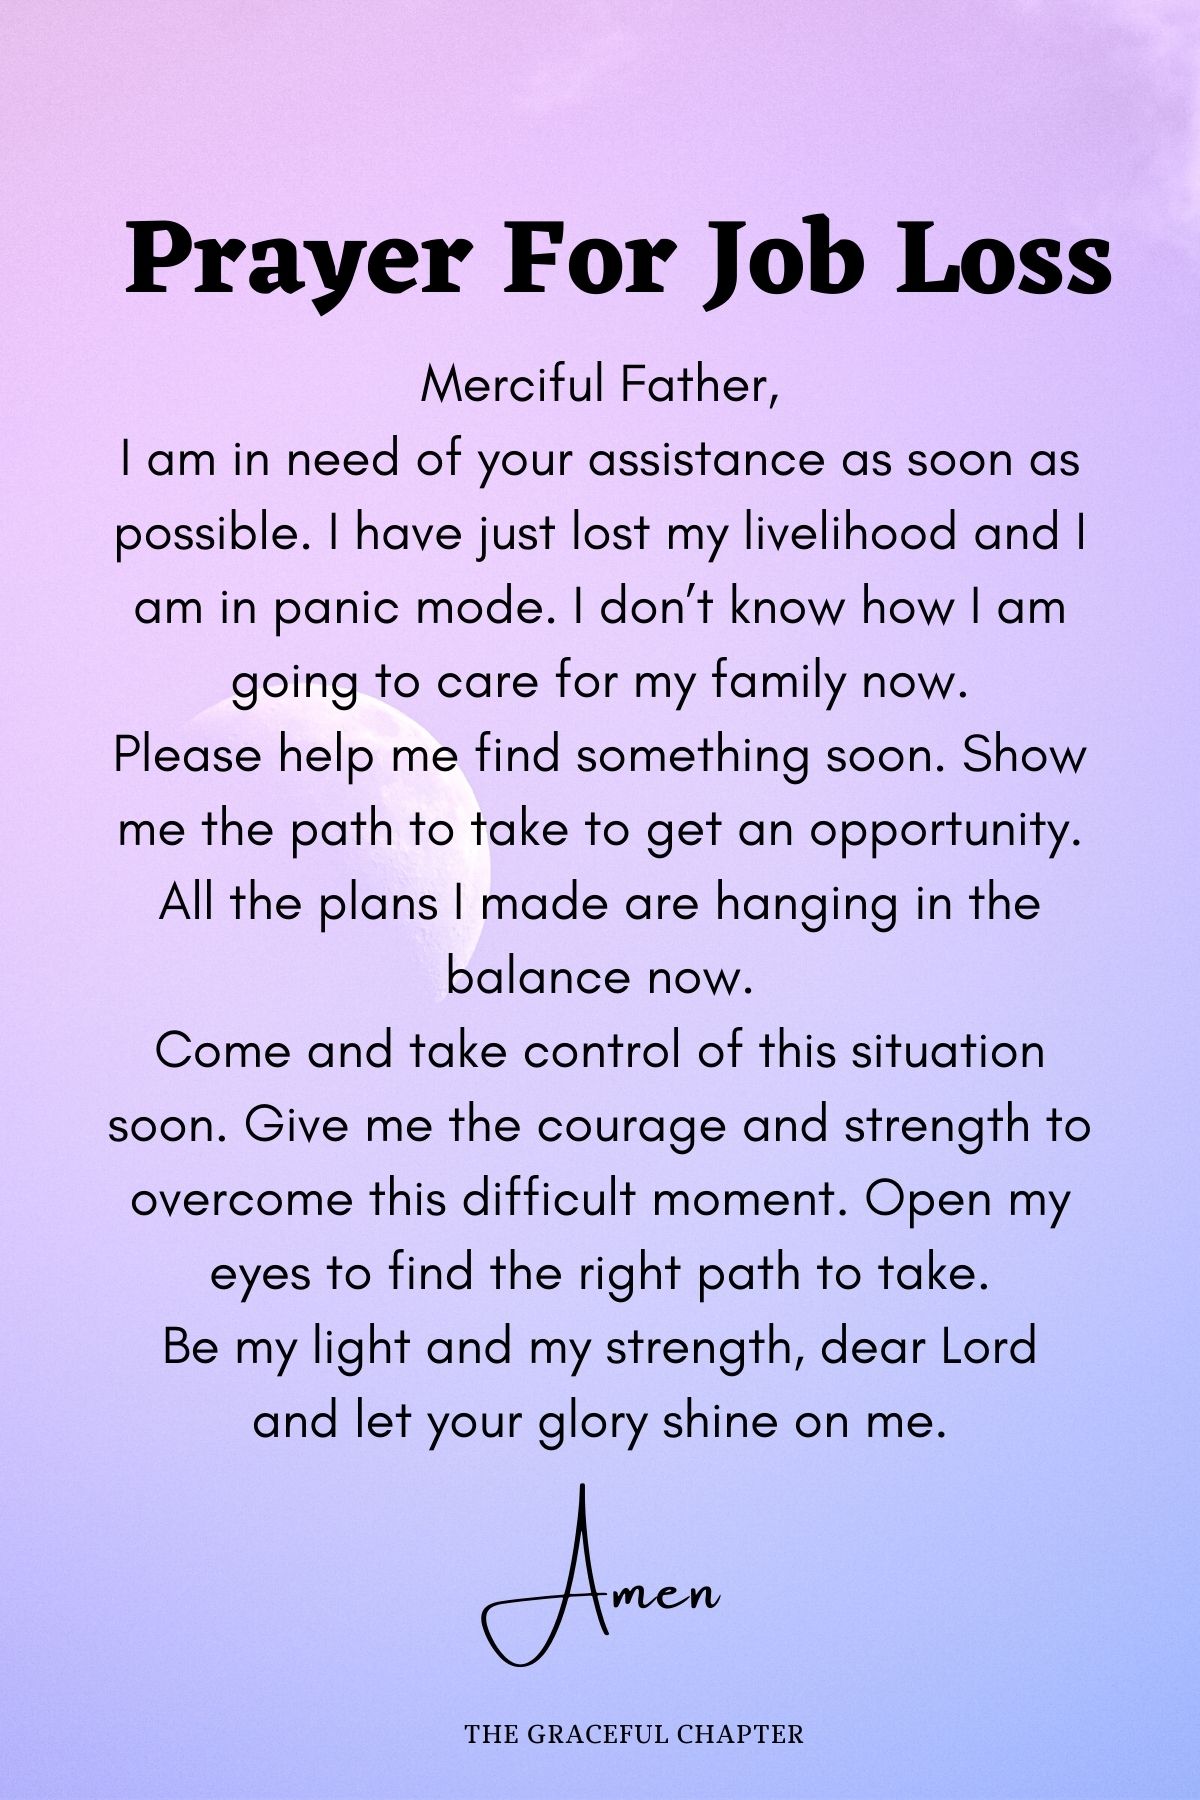 Prayer for job loss - prayers for difficult situations